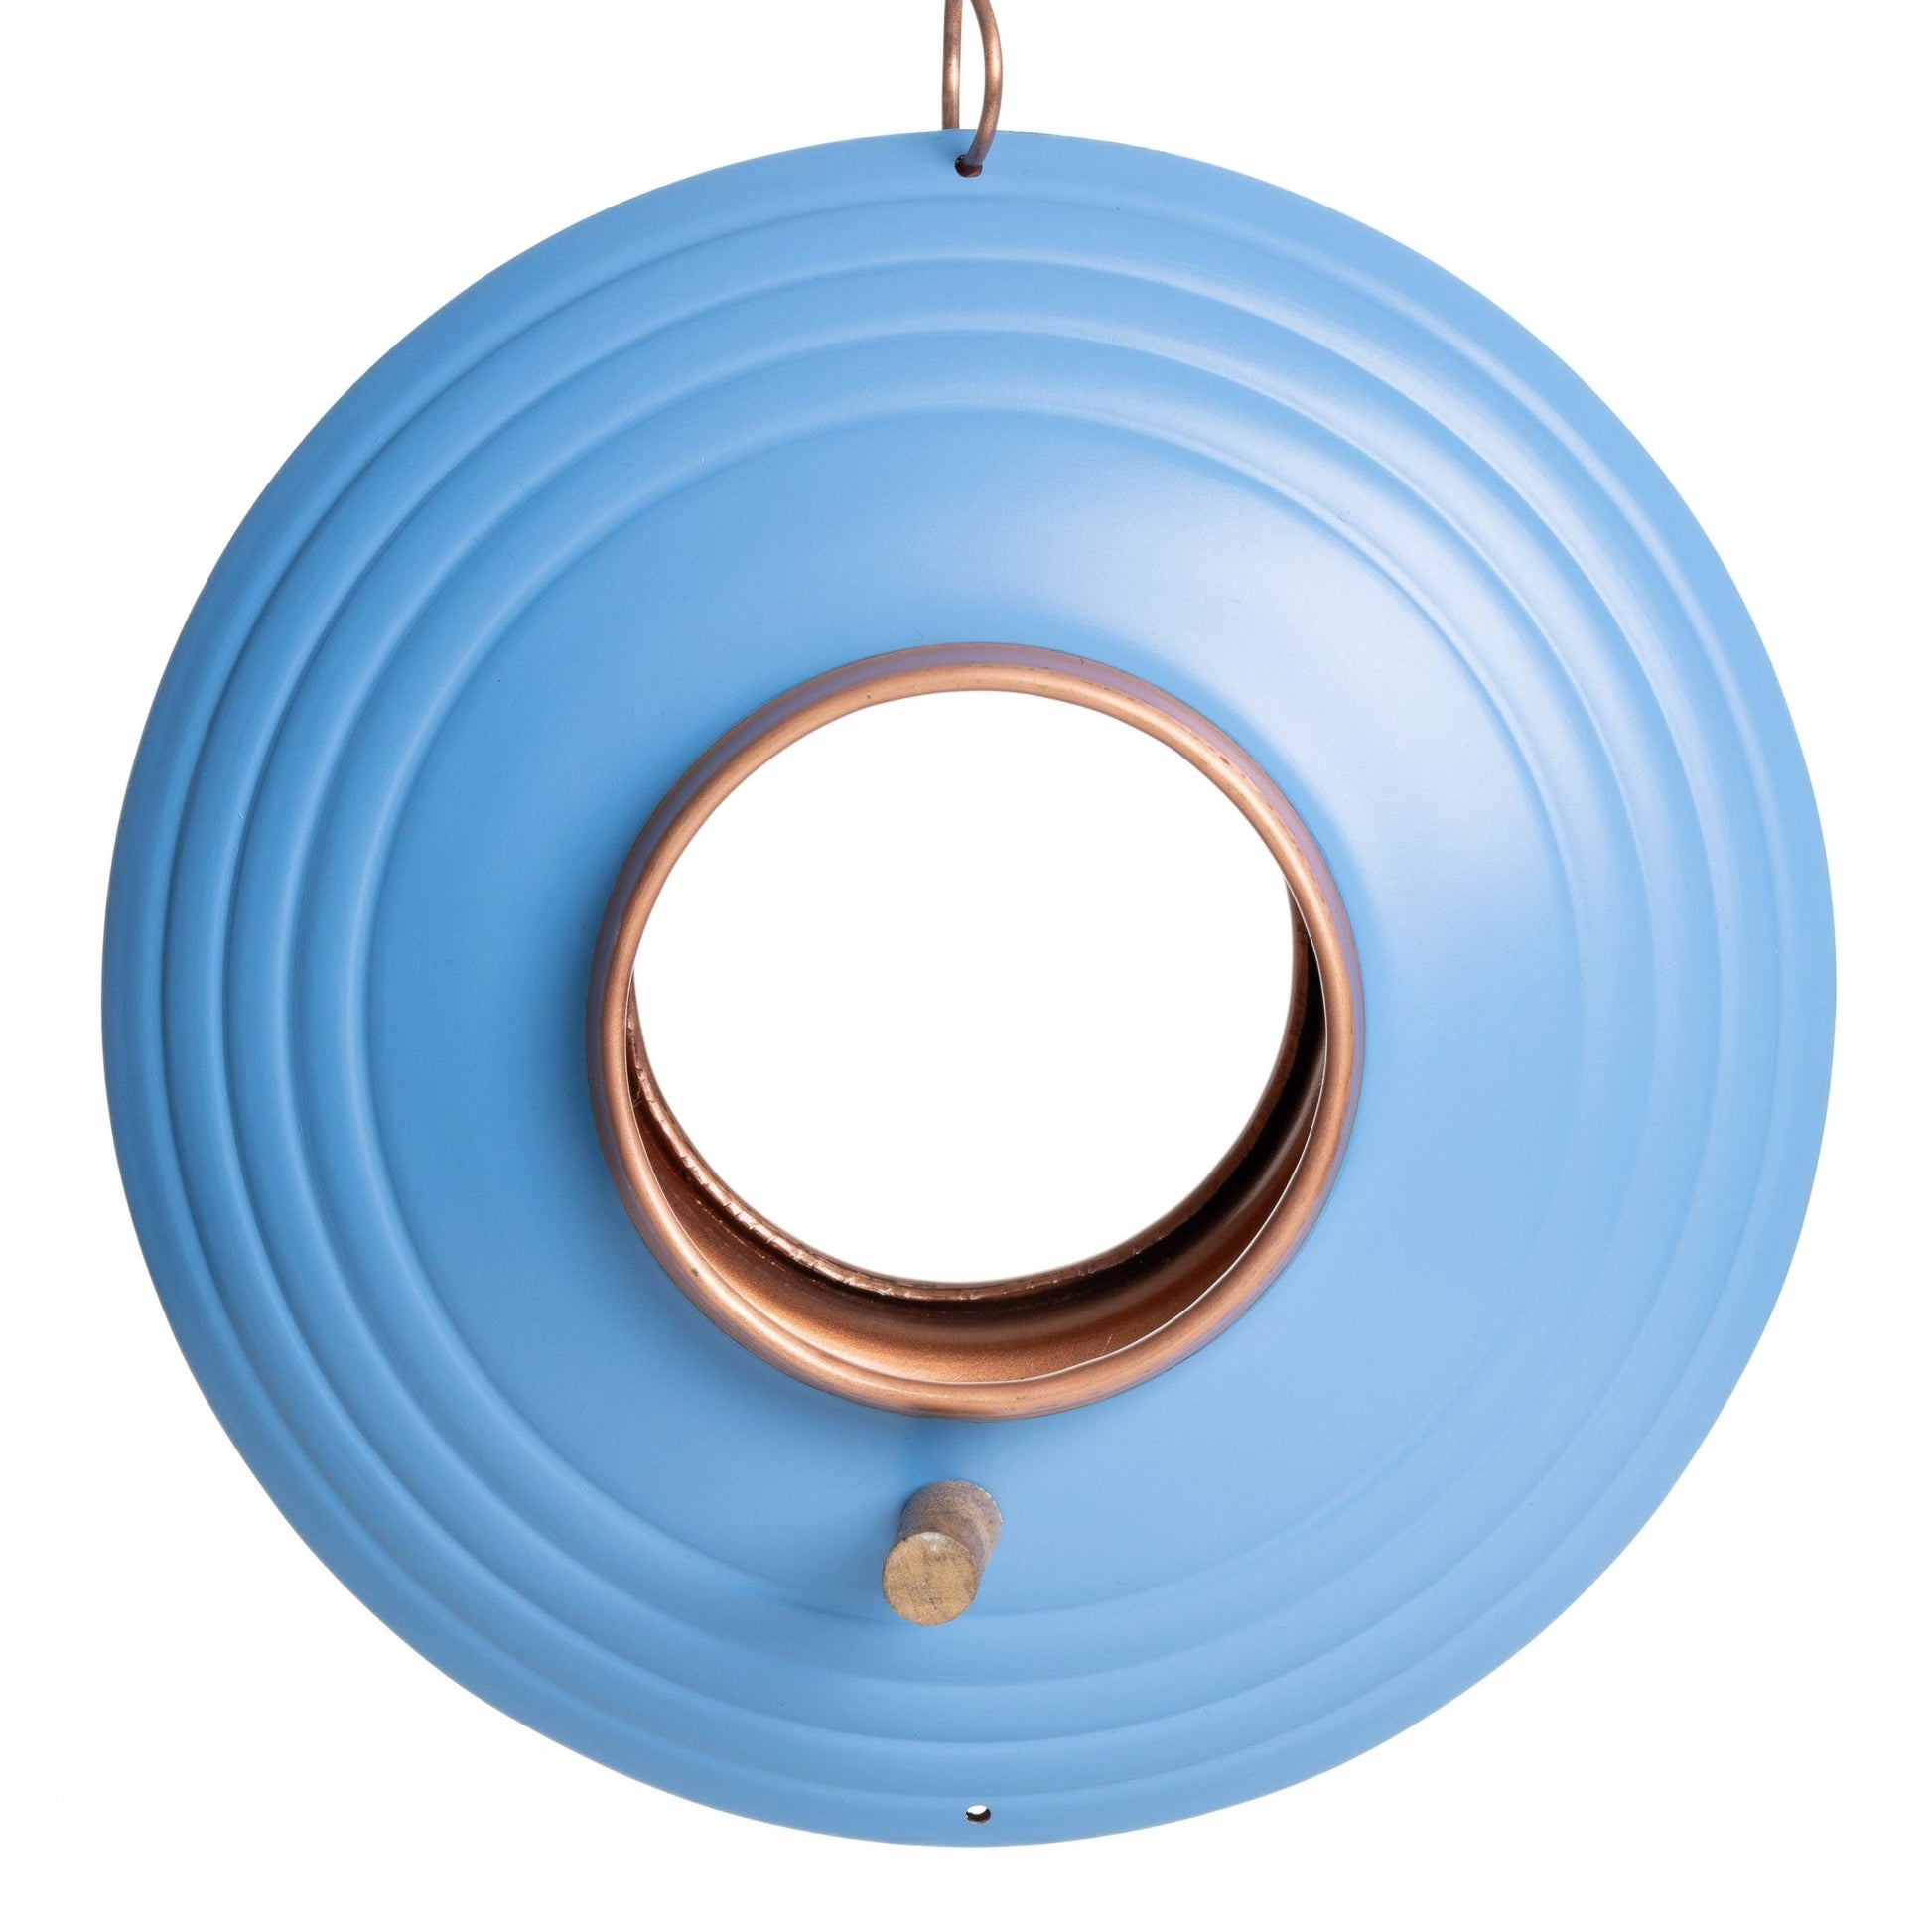 Azure Fly-Thru™ Bird Feeder, Copper Accents, Multiple Perches - Good Directions